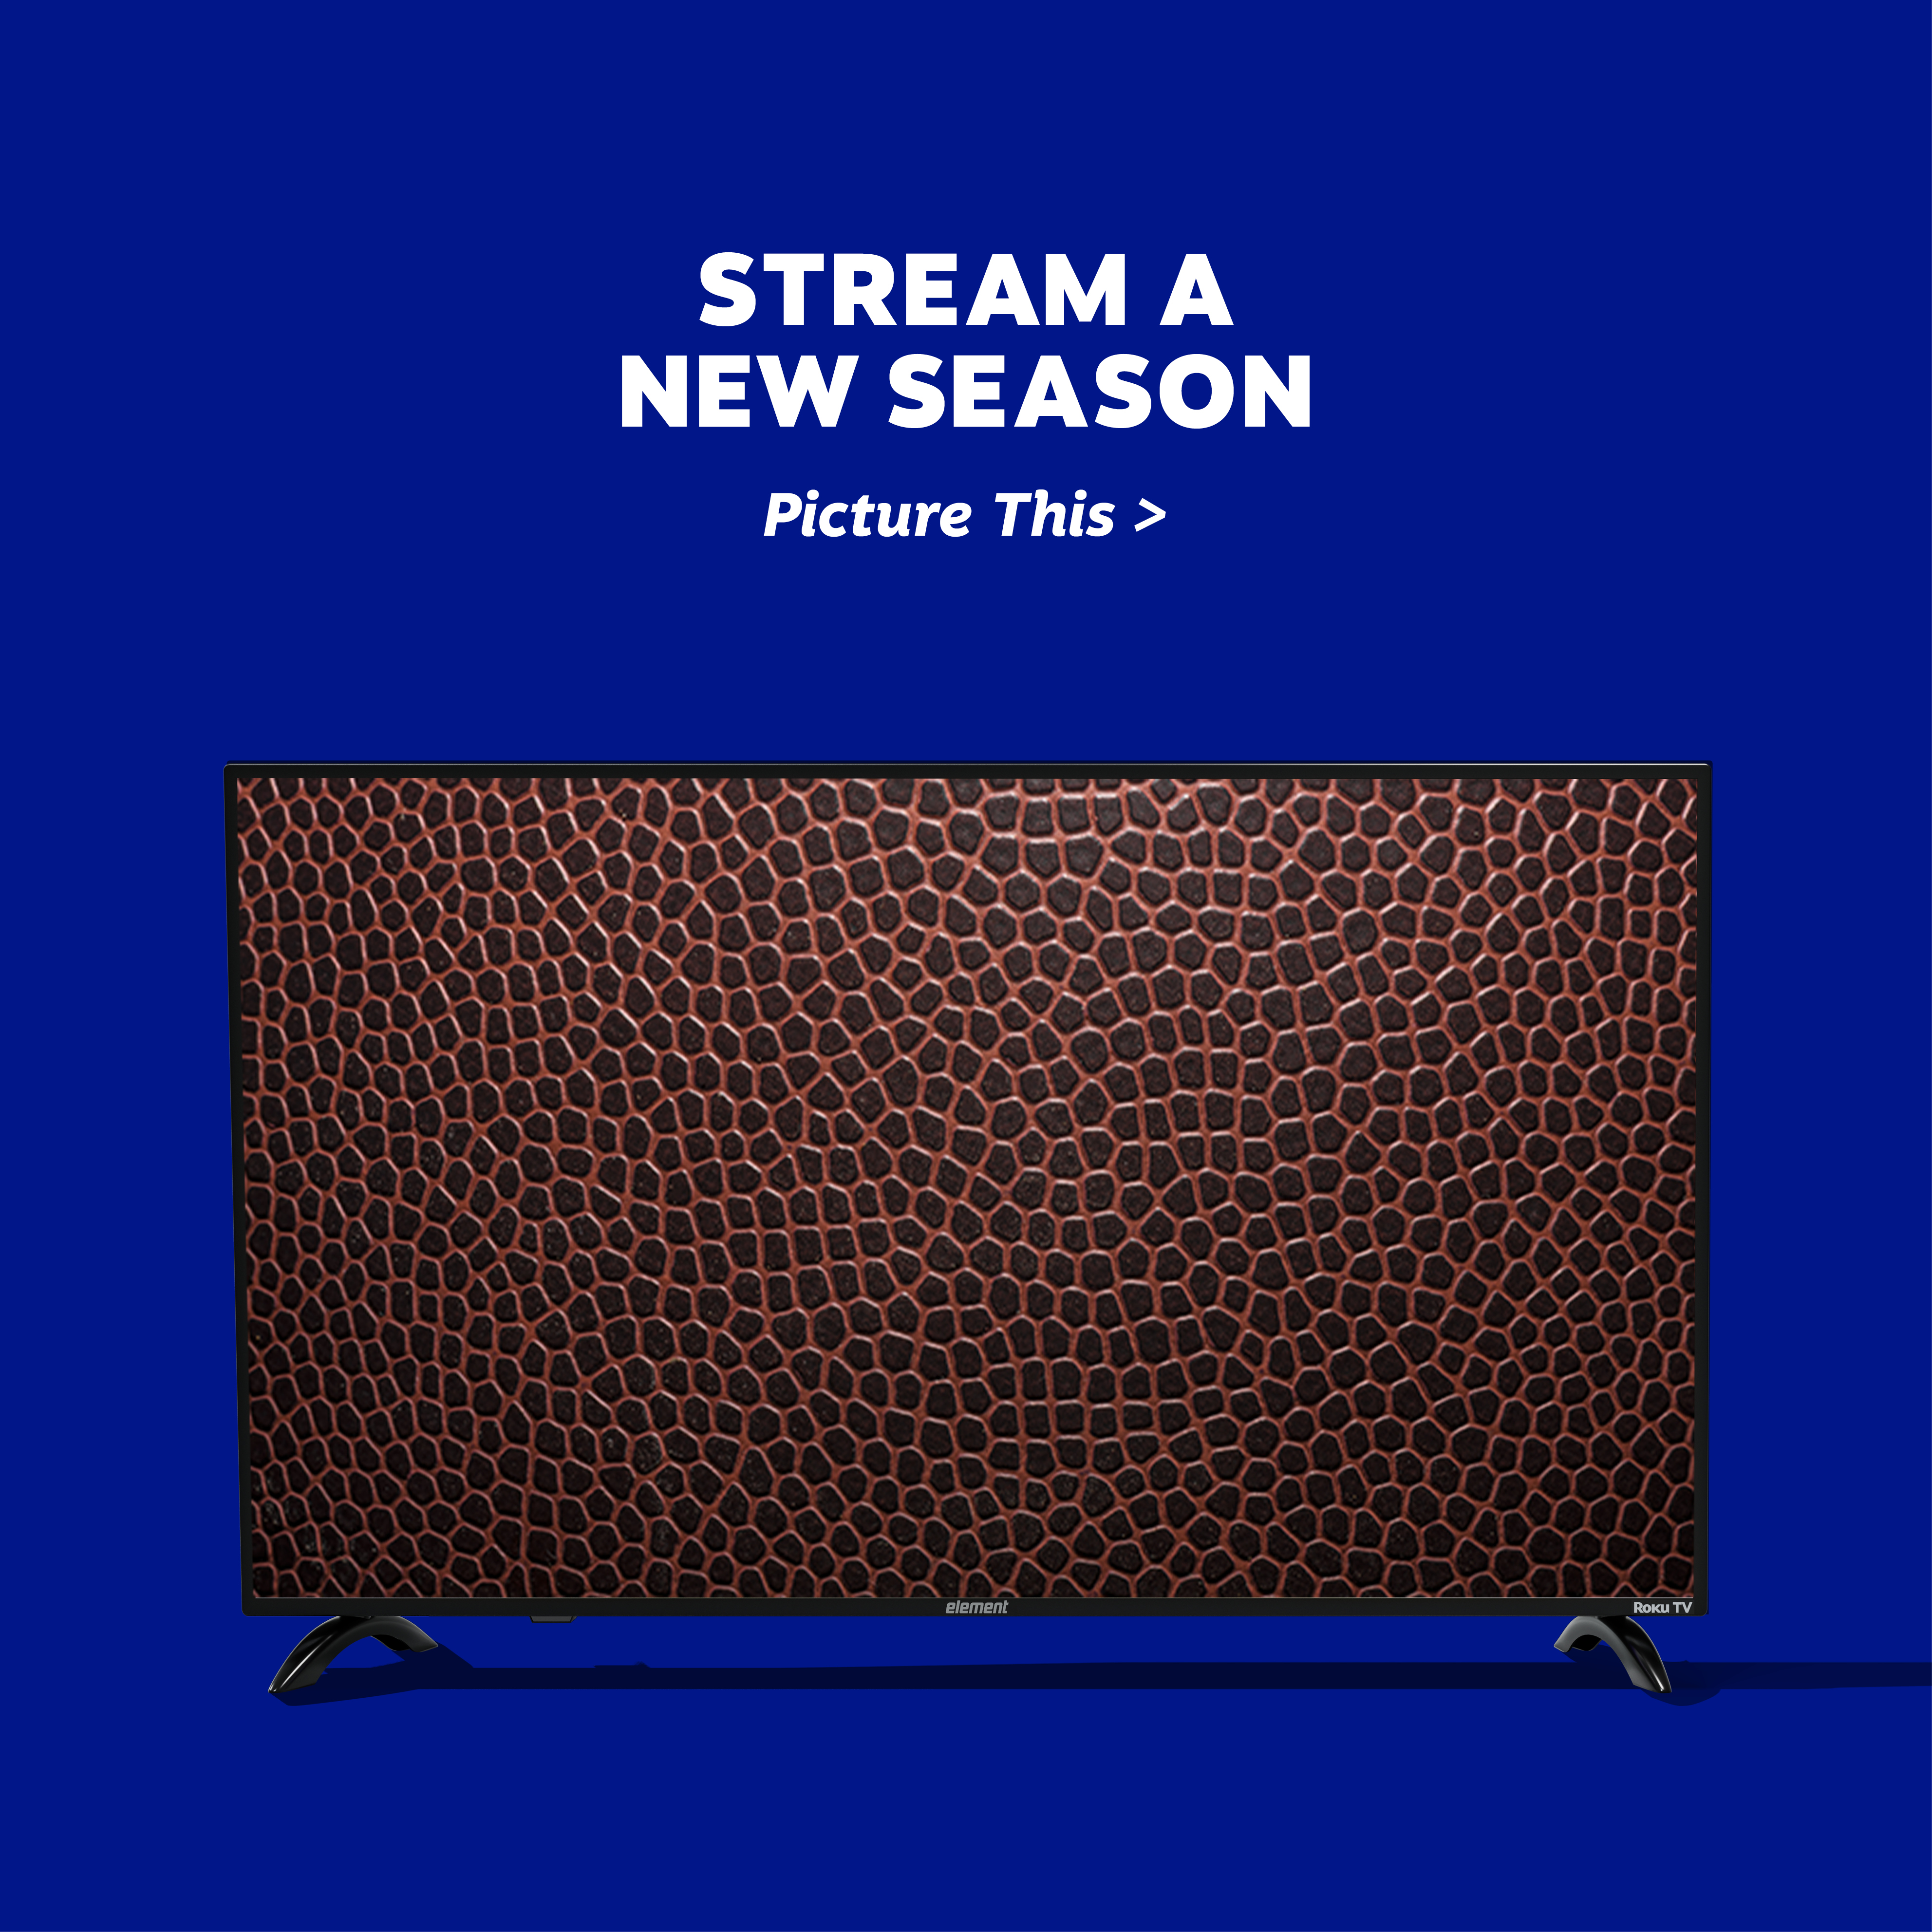 Image of television witha football on the screen with text "stream a new season."